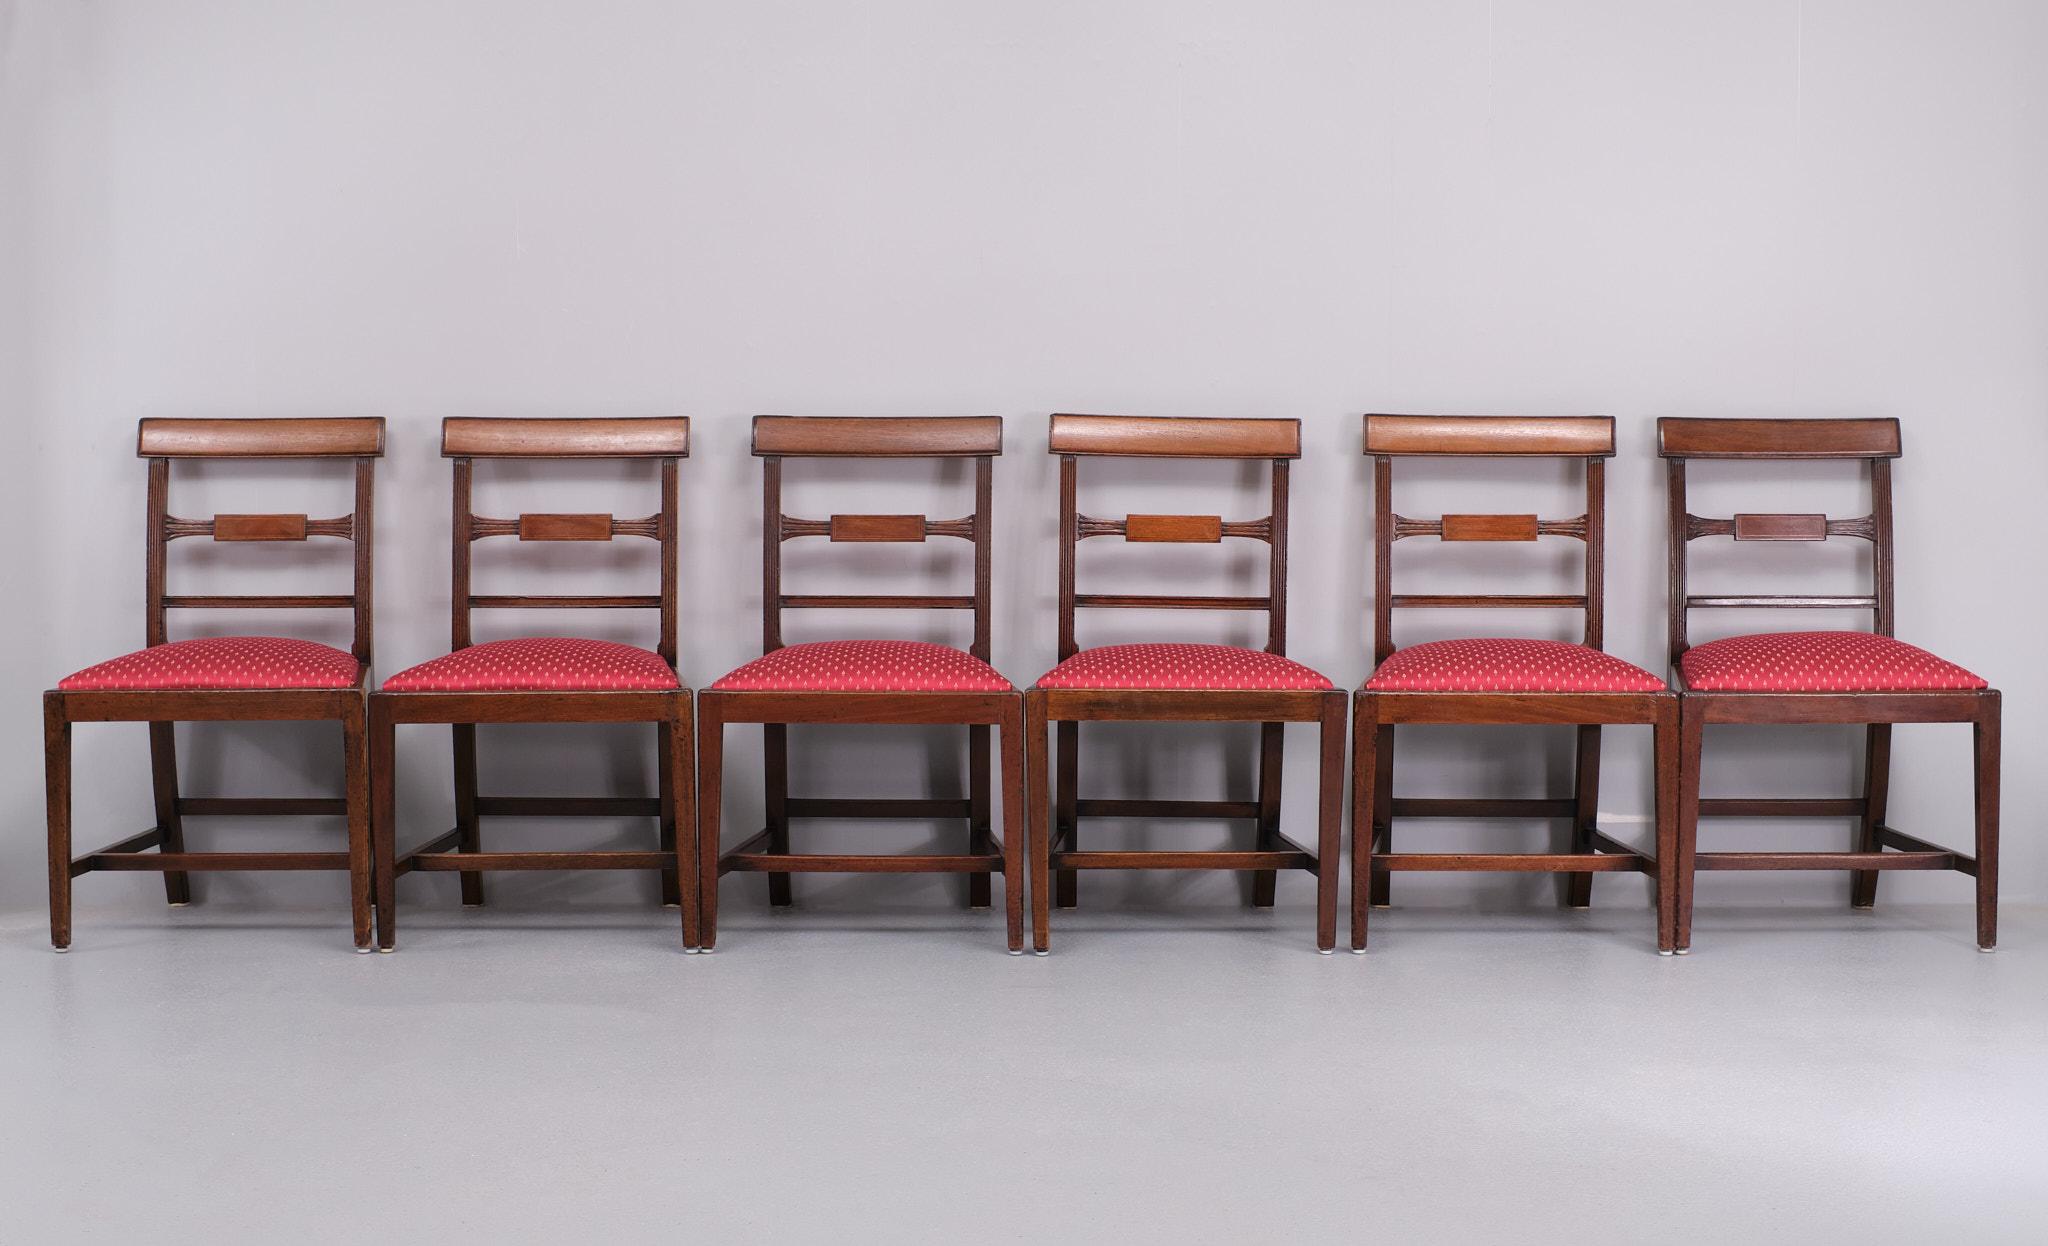 Mid-19th Century Antique Regency Dining chairs  1850s England  For Sale